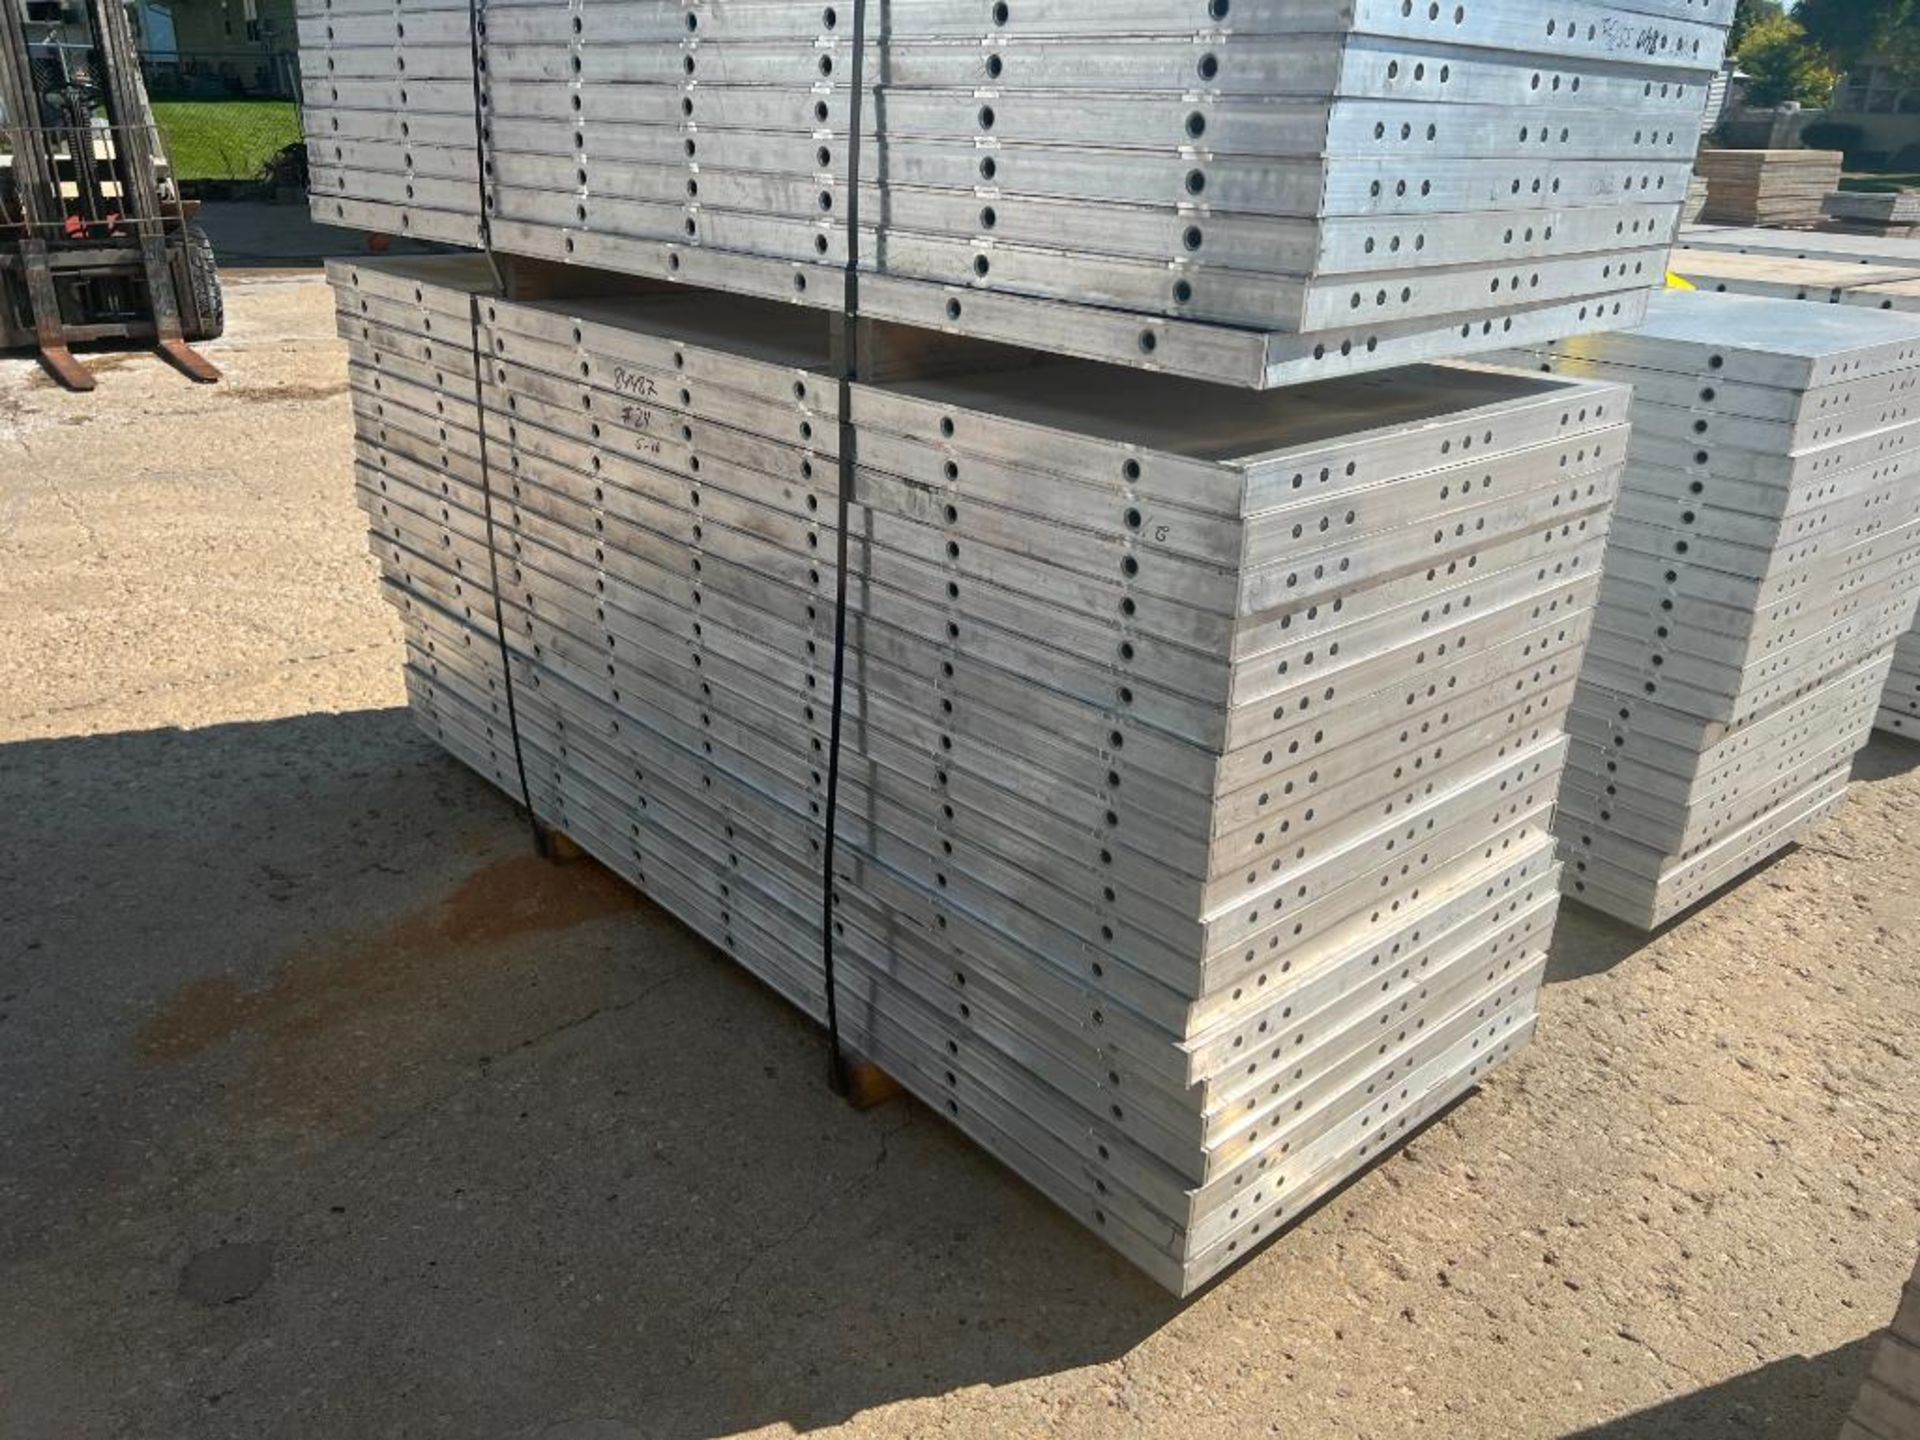 (20) NEW 3' x 8' Wall Ties Aluminum Concrete Forms, 6-12 Hole Pattern. Located in Mt. Pleasant, IA - Image 2 of 2